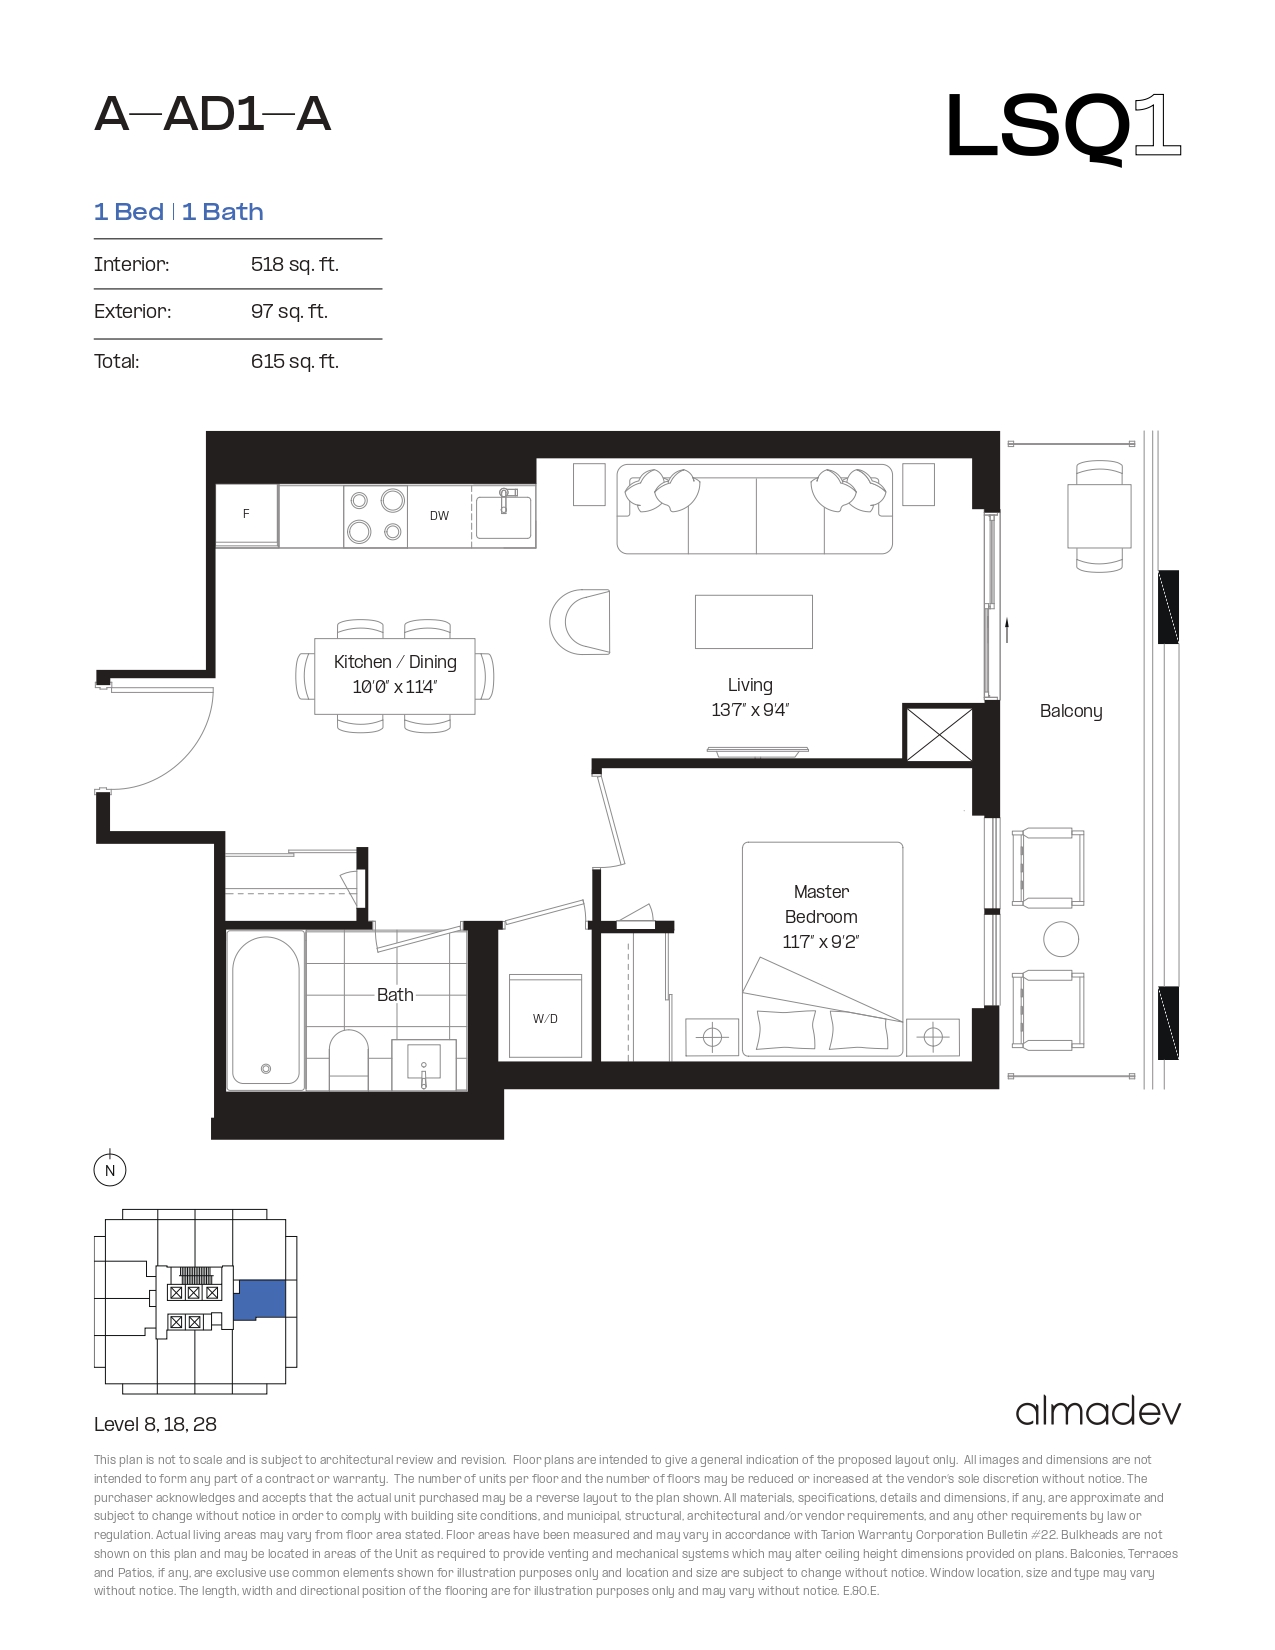 A-AD1-A Floor Plan of LSQ Condos with undefined beds